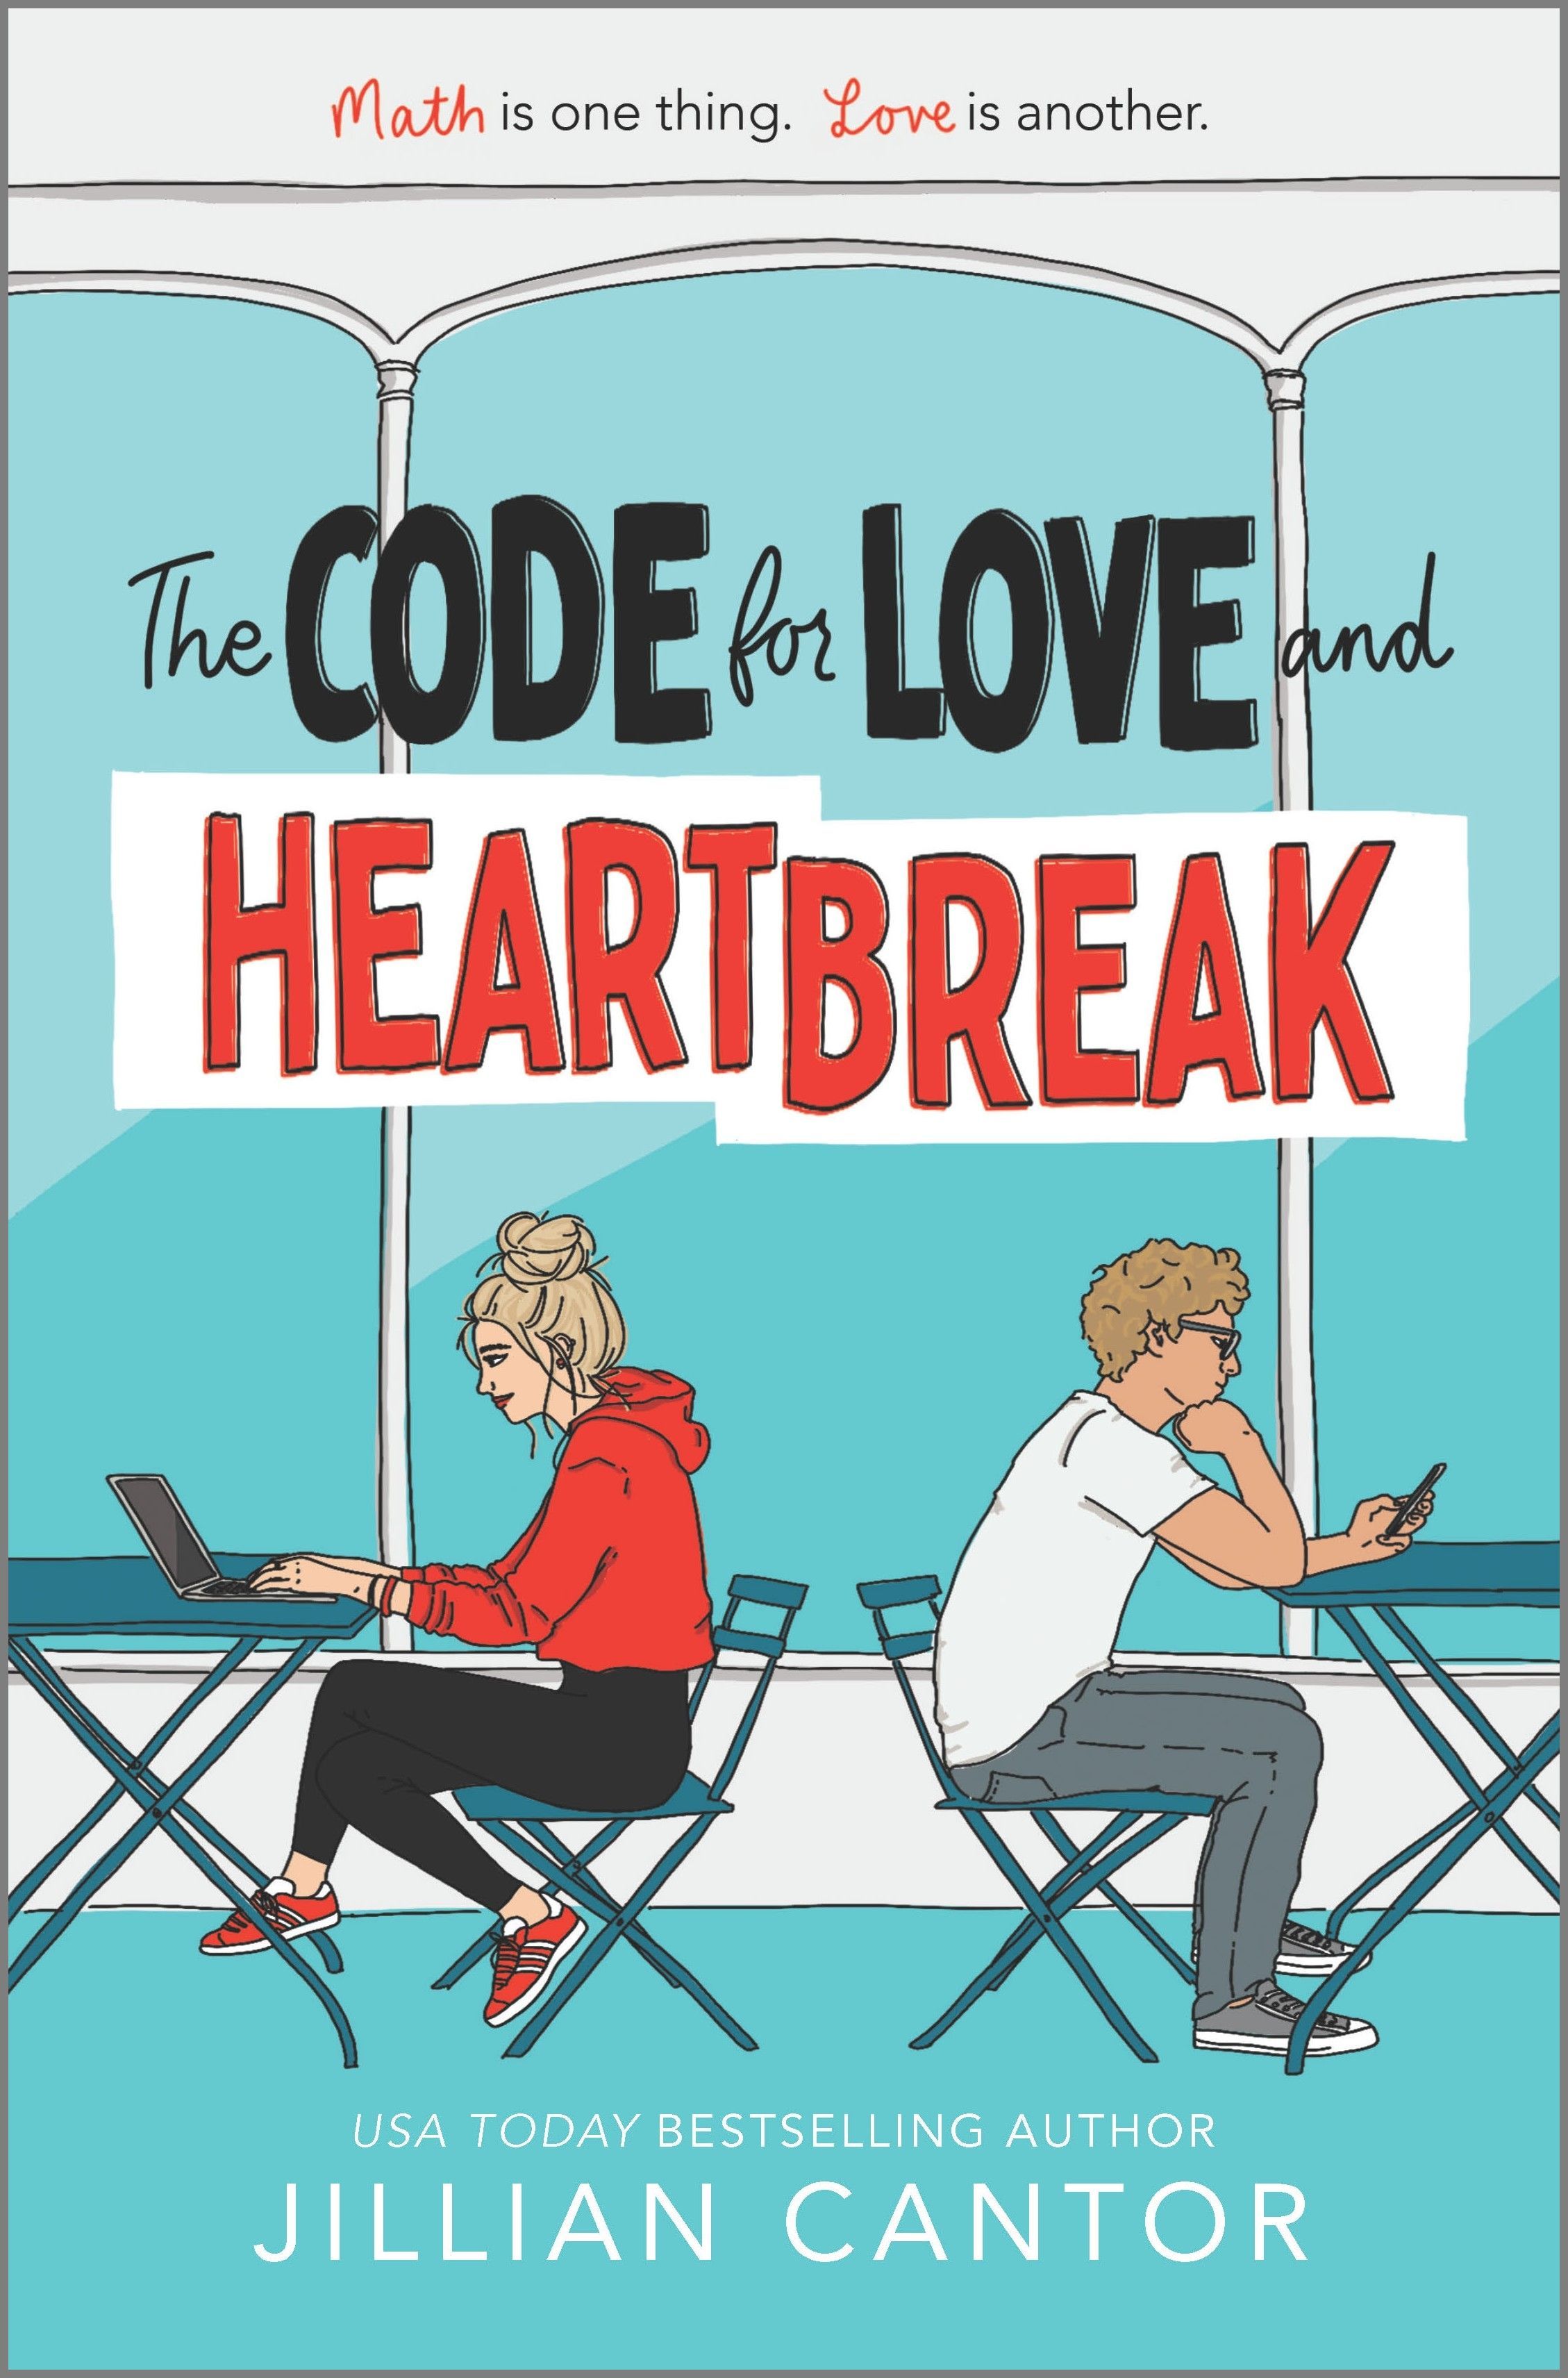 the-code-for-love-and-heartbreak-by-jillian-cantor-the-storygraph